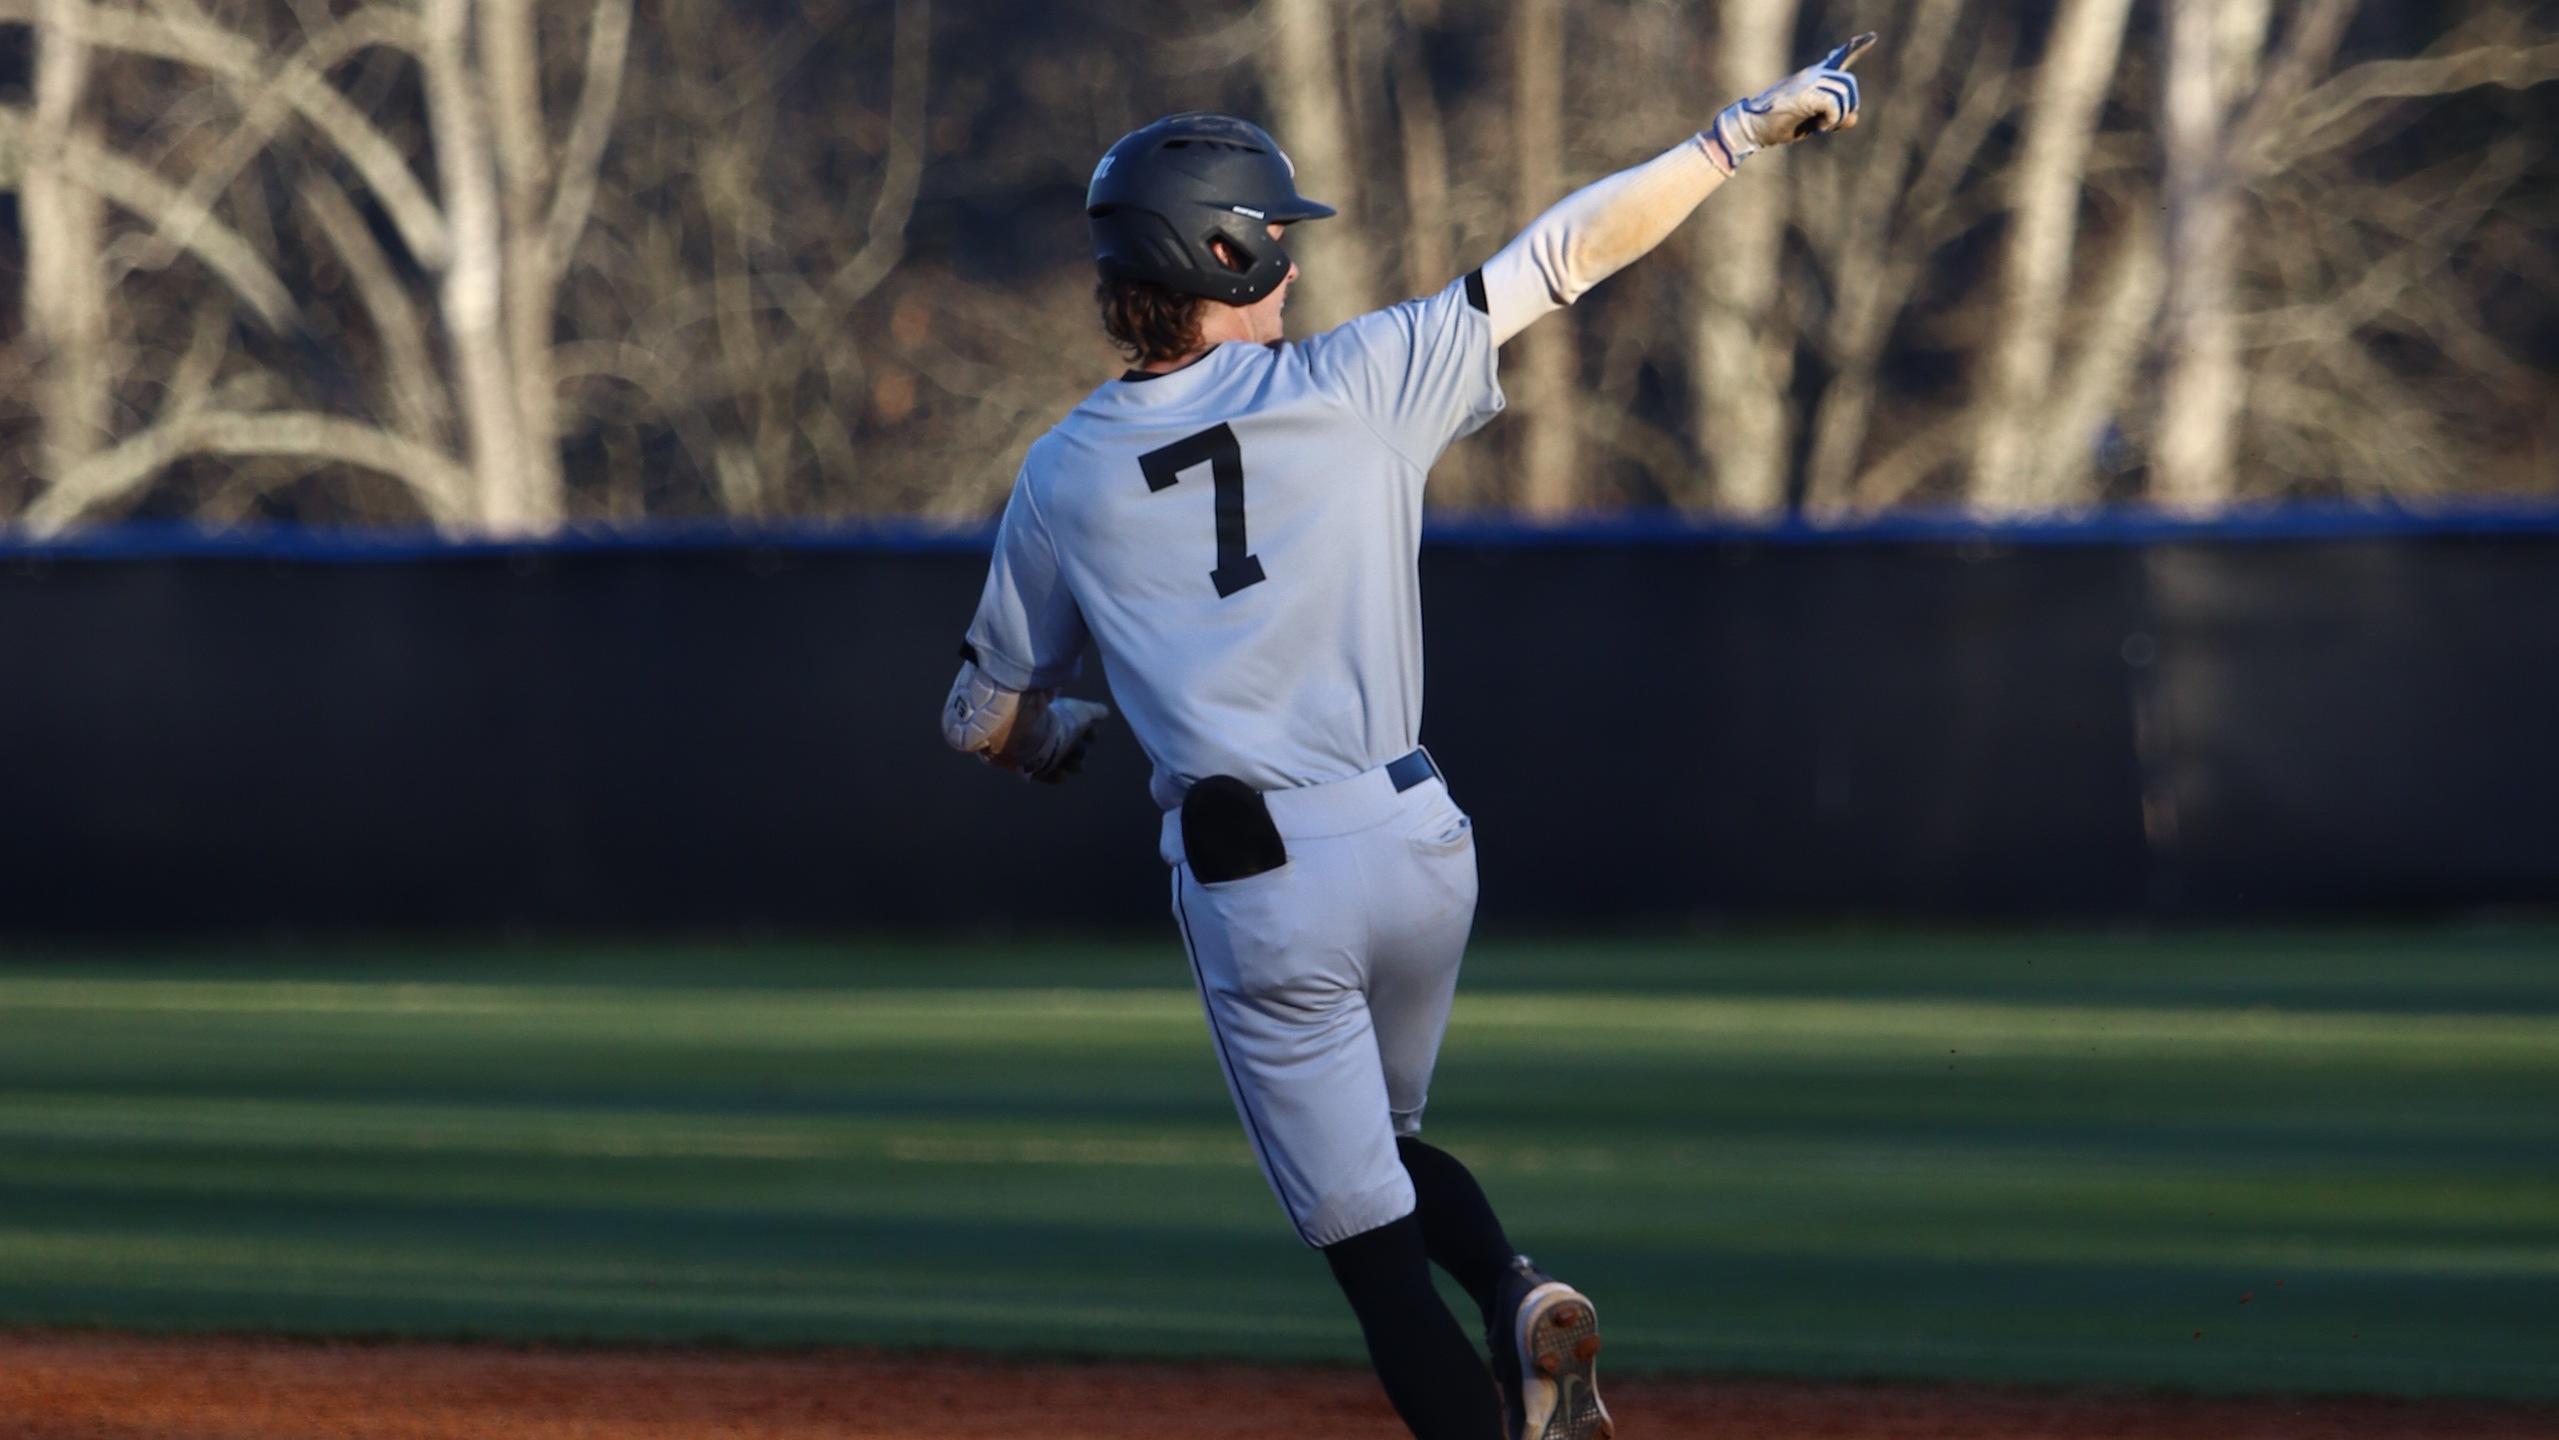 Trojans Wrap Up Season Opening Road Trip With 10-5 Win Over Southern Wesleyan